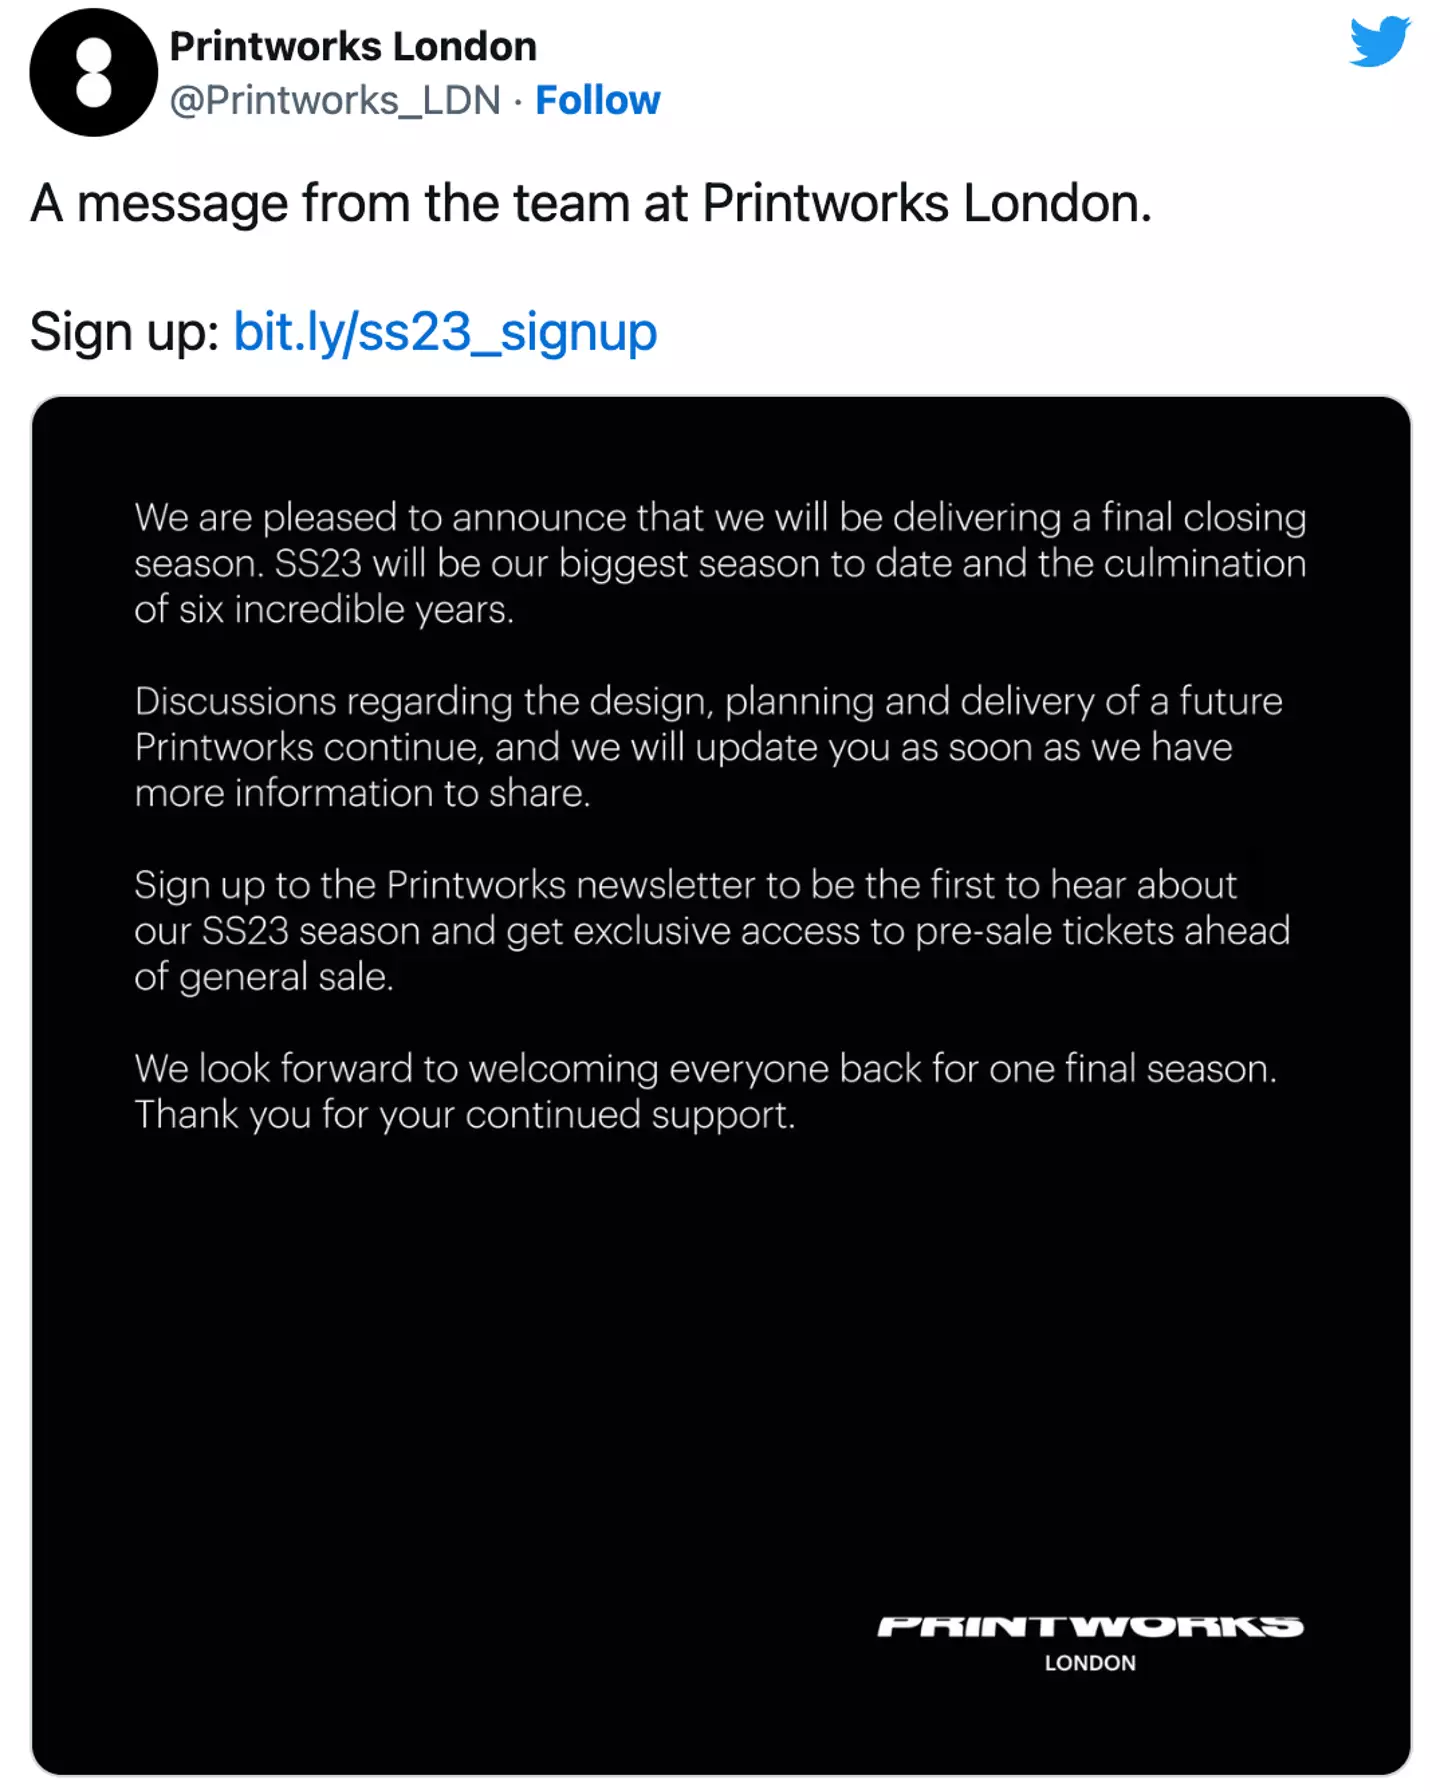 Printworks revealed last year it would be closing down in 2023.